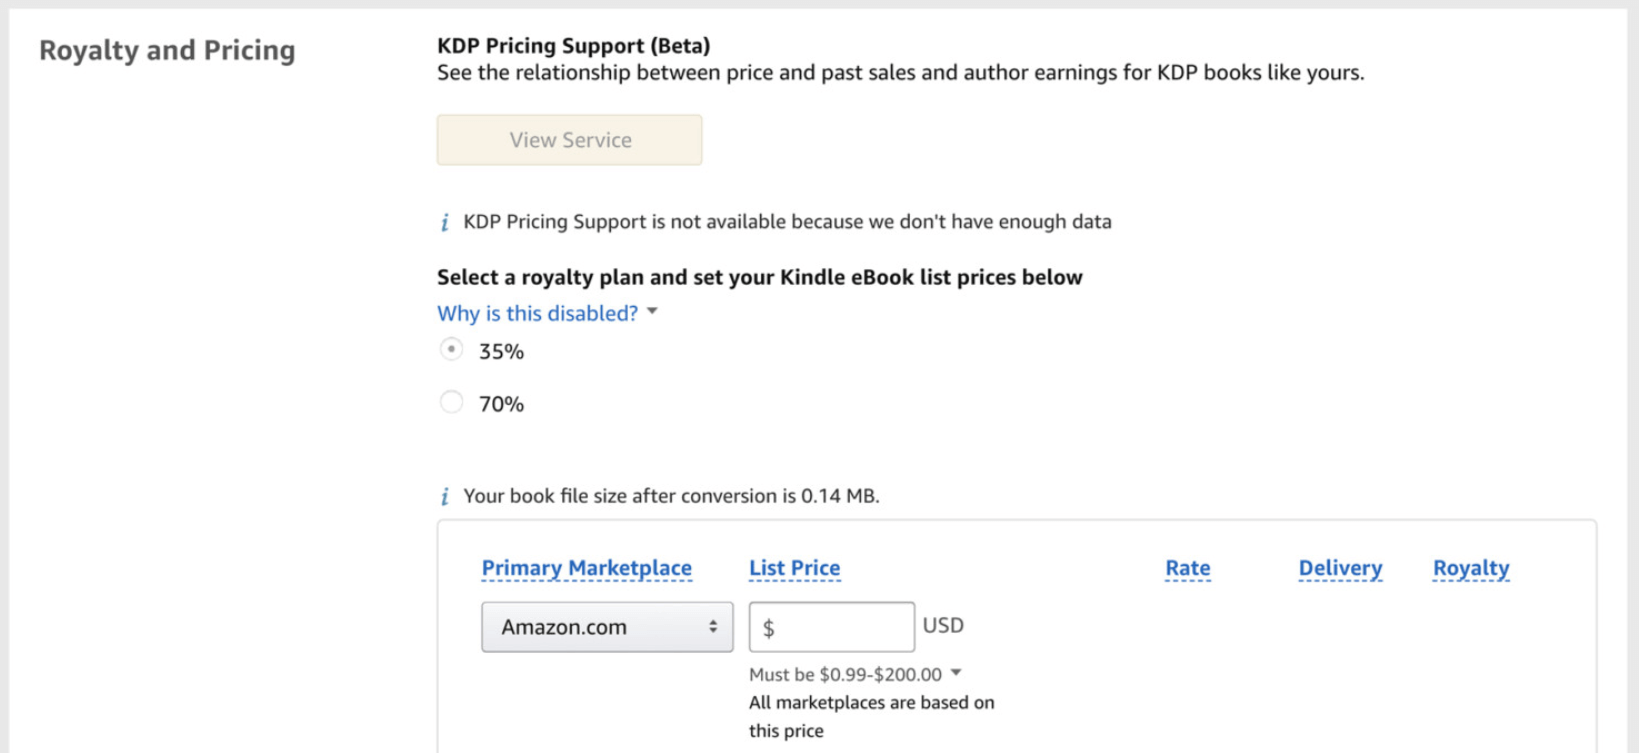 How To Self-Publish And Market Your Book On Amazon: Step By Step Guide